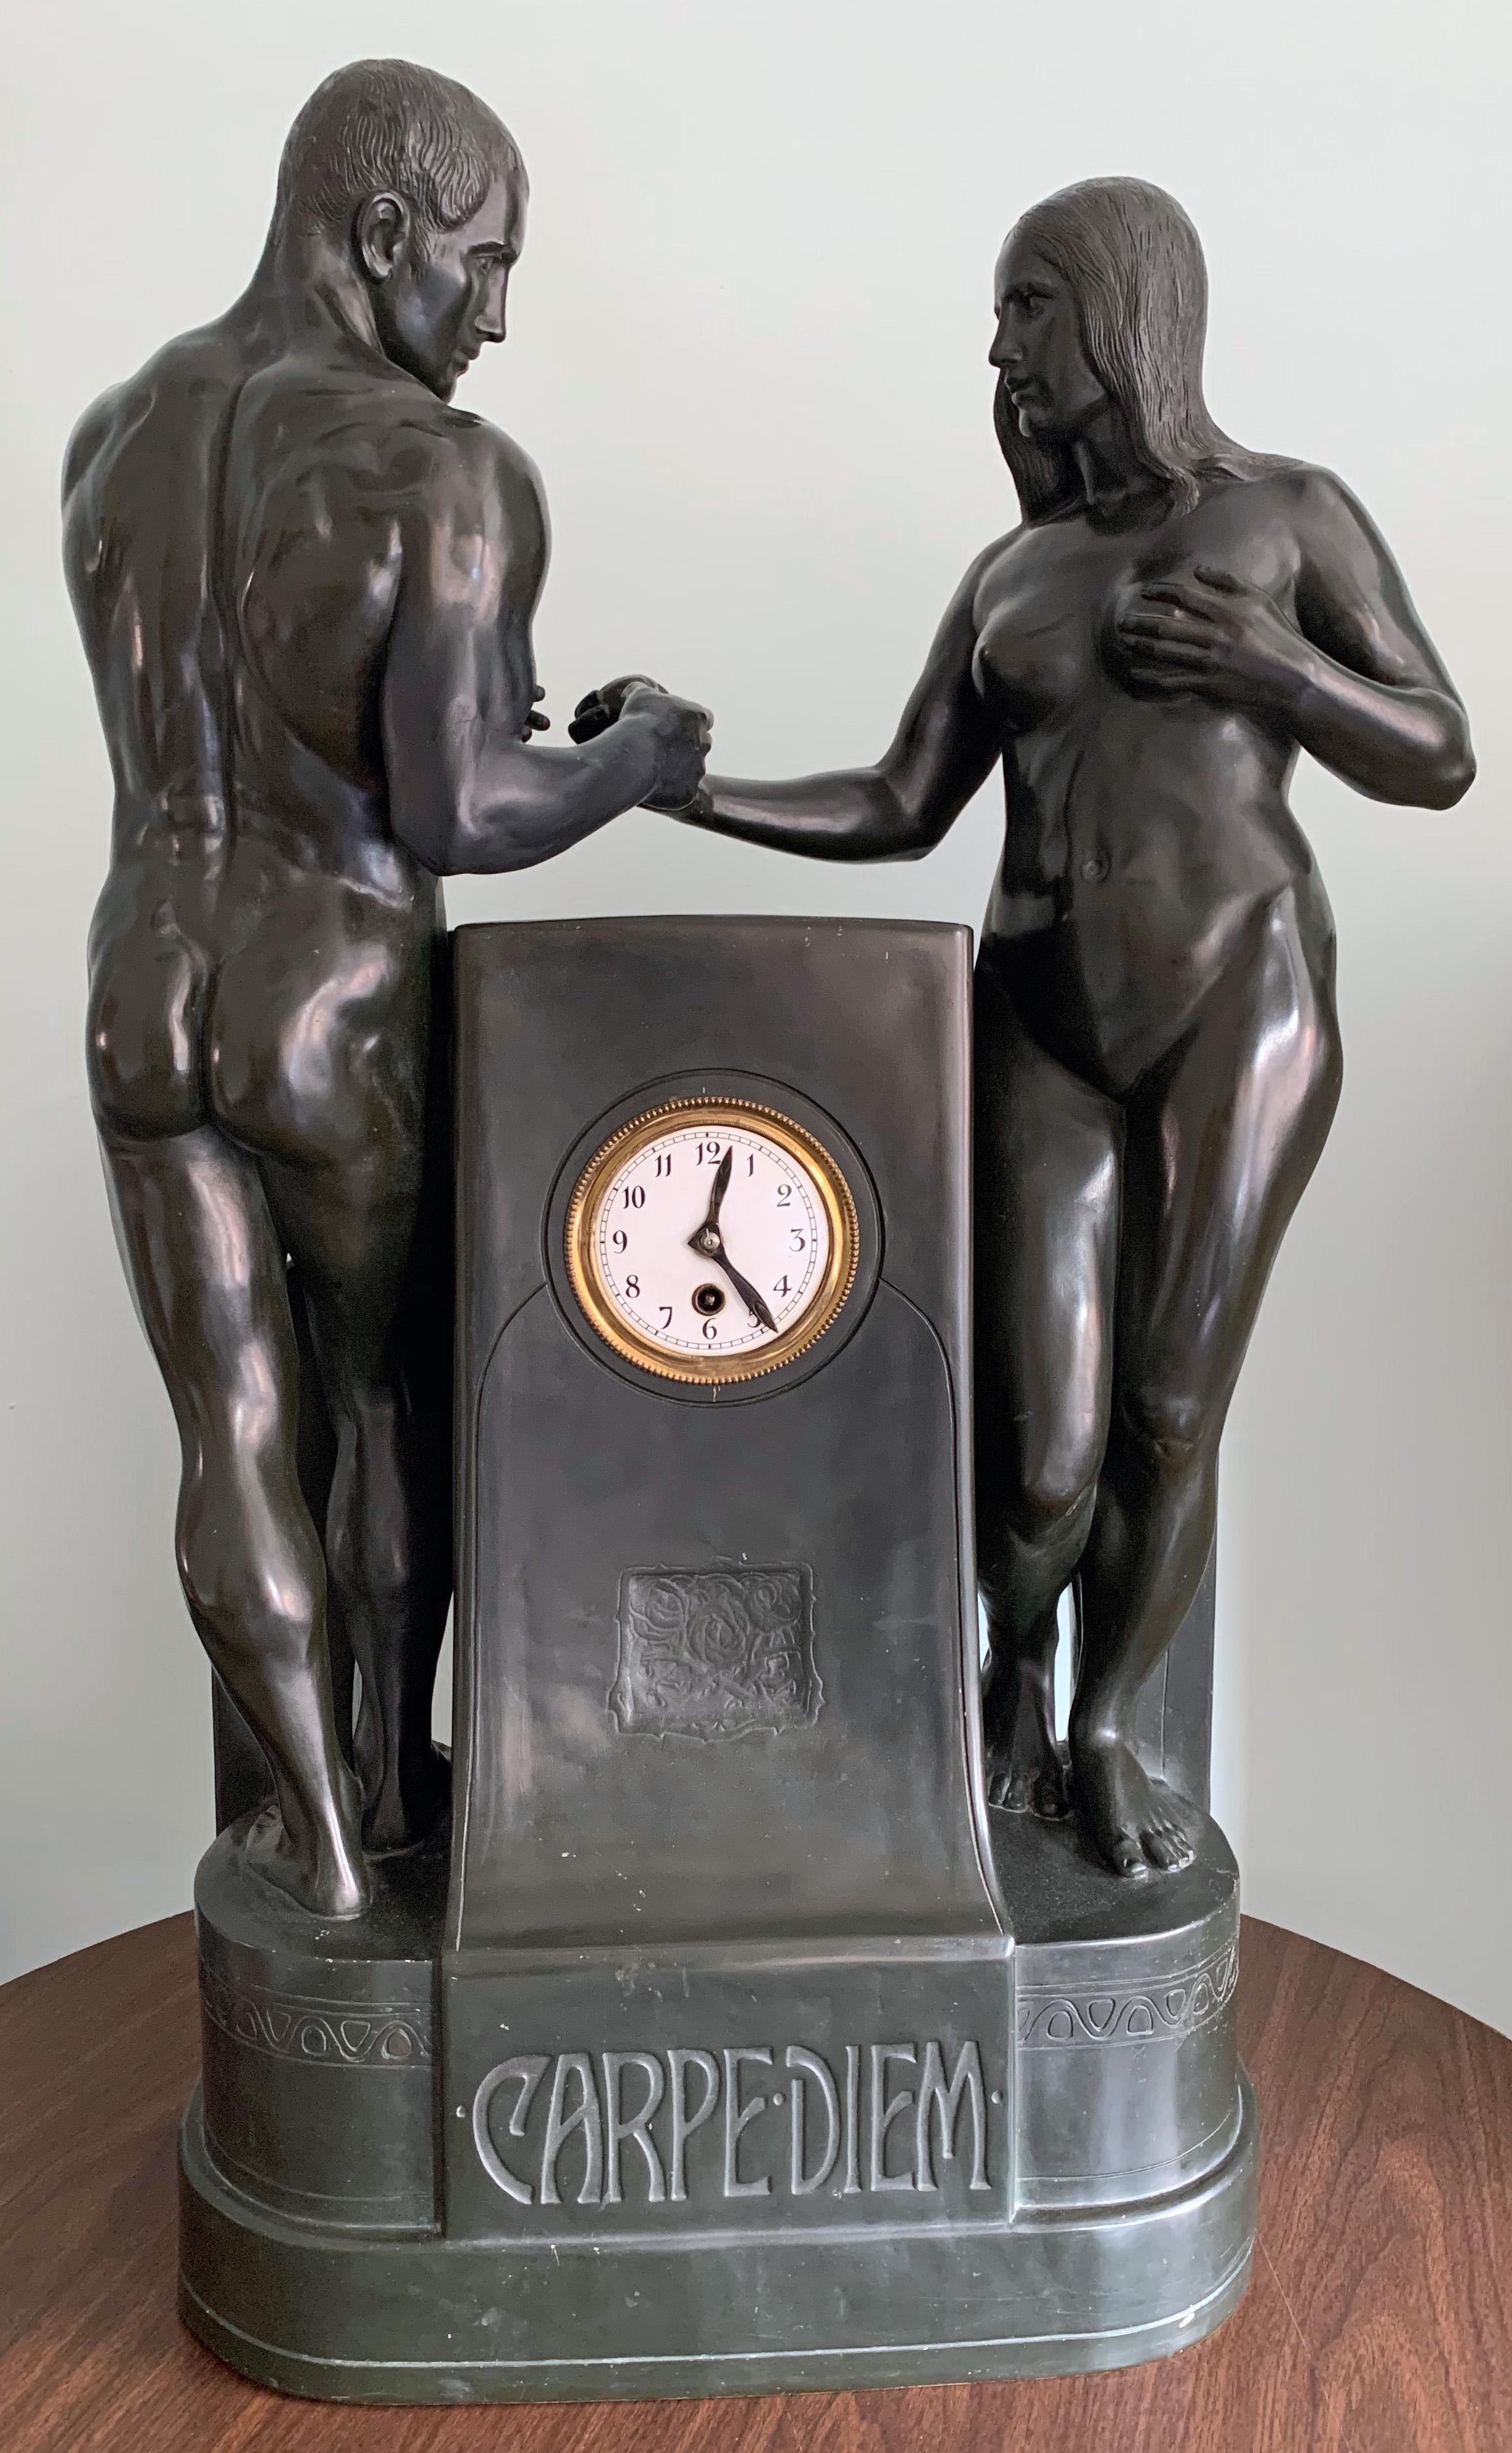 Extremely rare and beautifully sculpted and executed, this monumental terracotta clock depicting a nude Adam and Eve exchanging the fateful apple, is finished in a green-black glaze approximating the dark bronze patina preferred by Germans at the